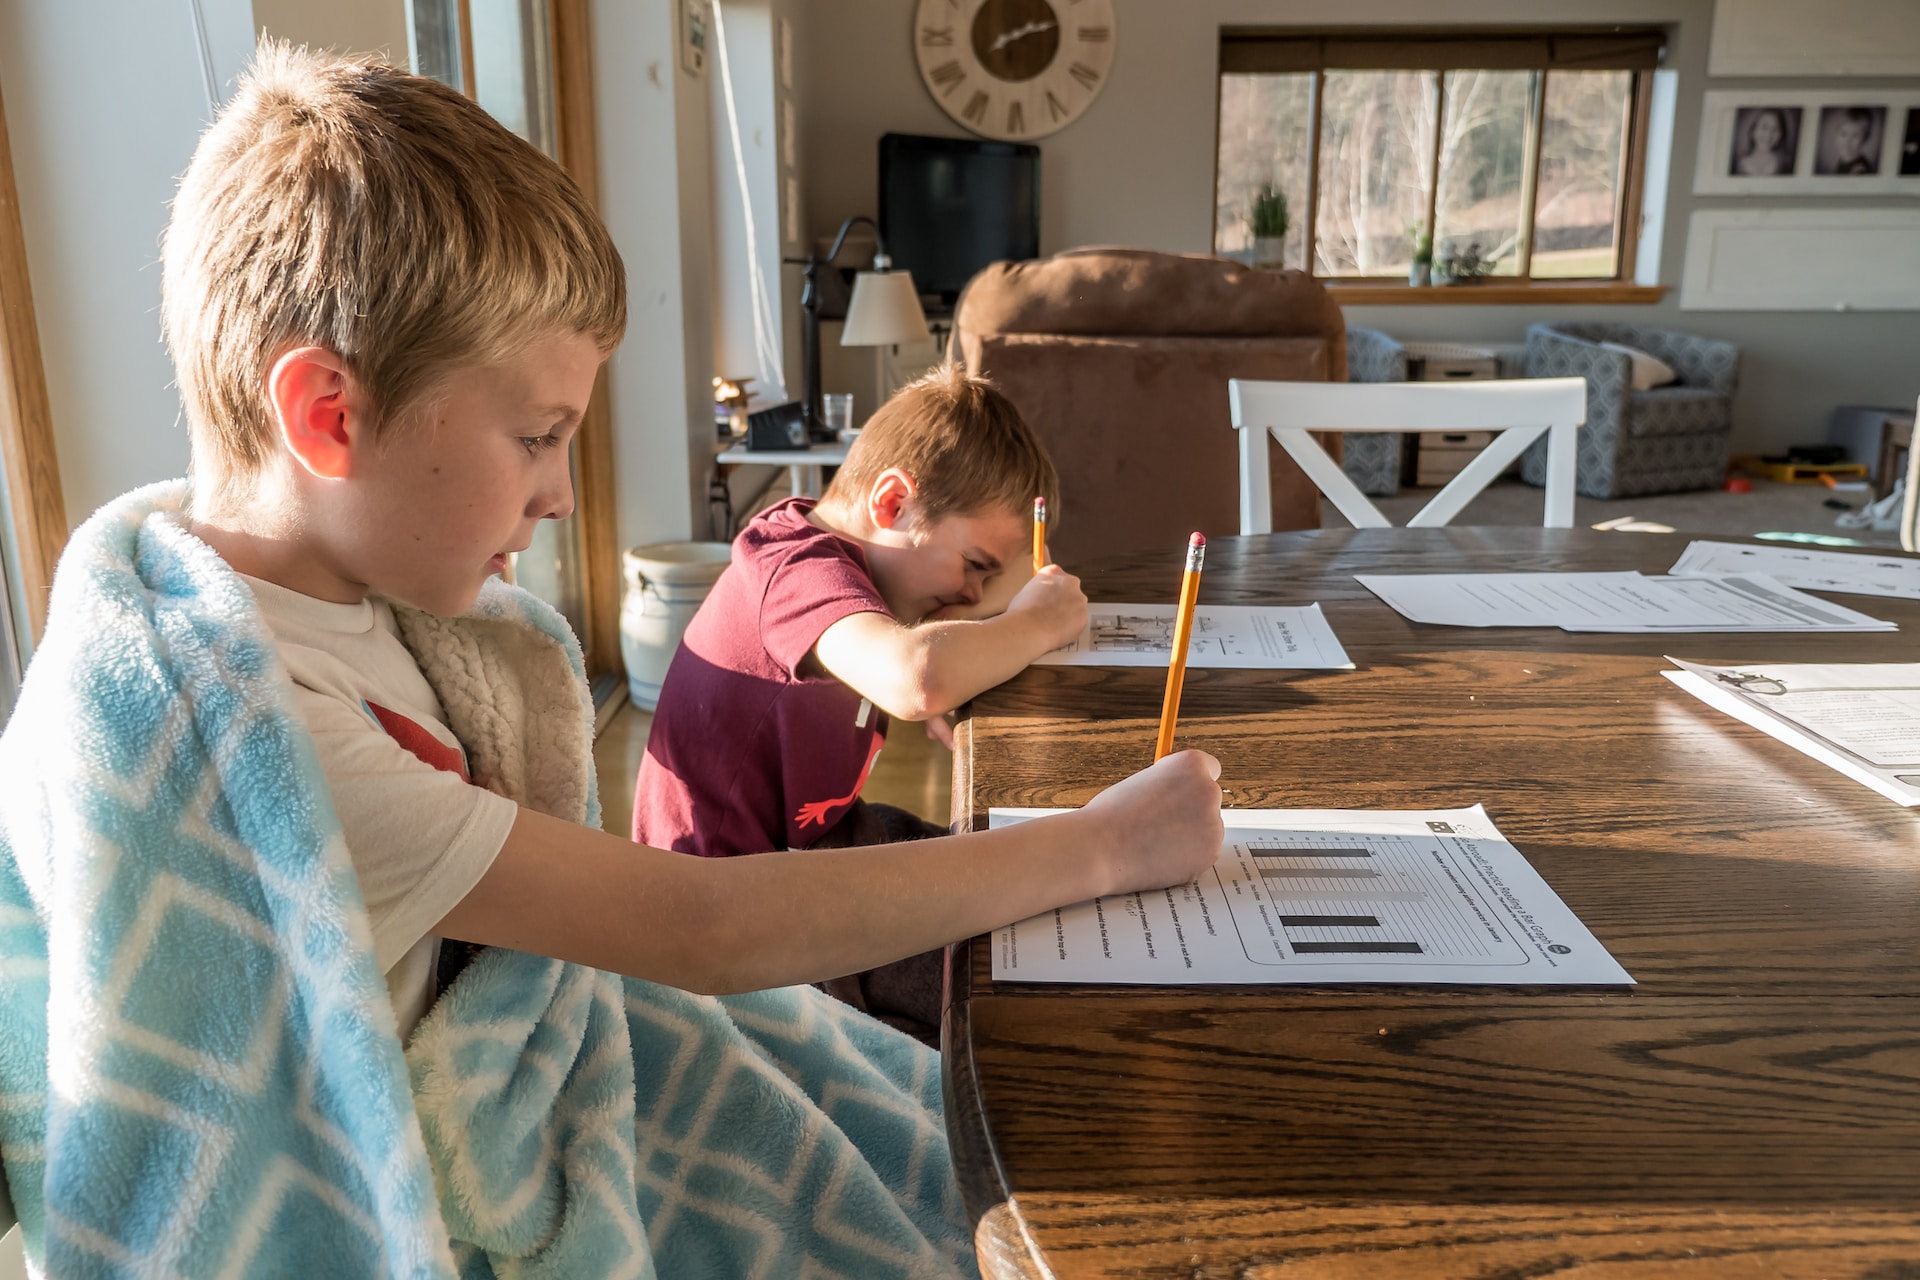 How to Teach Academic Writing in Your Homeschool